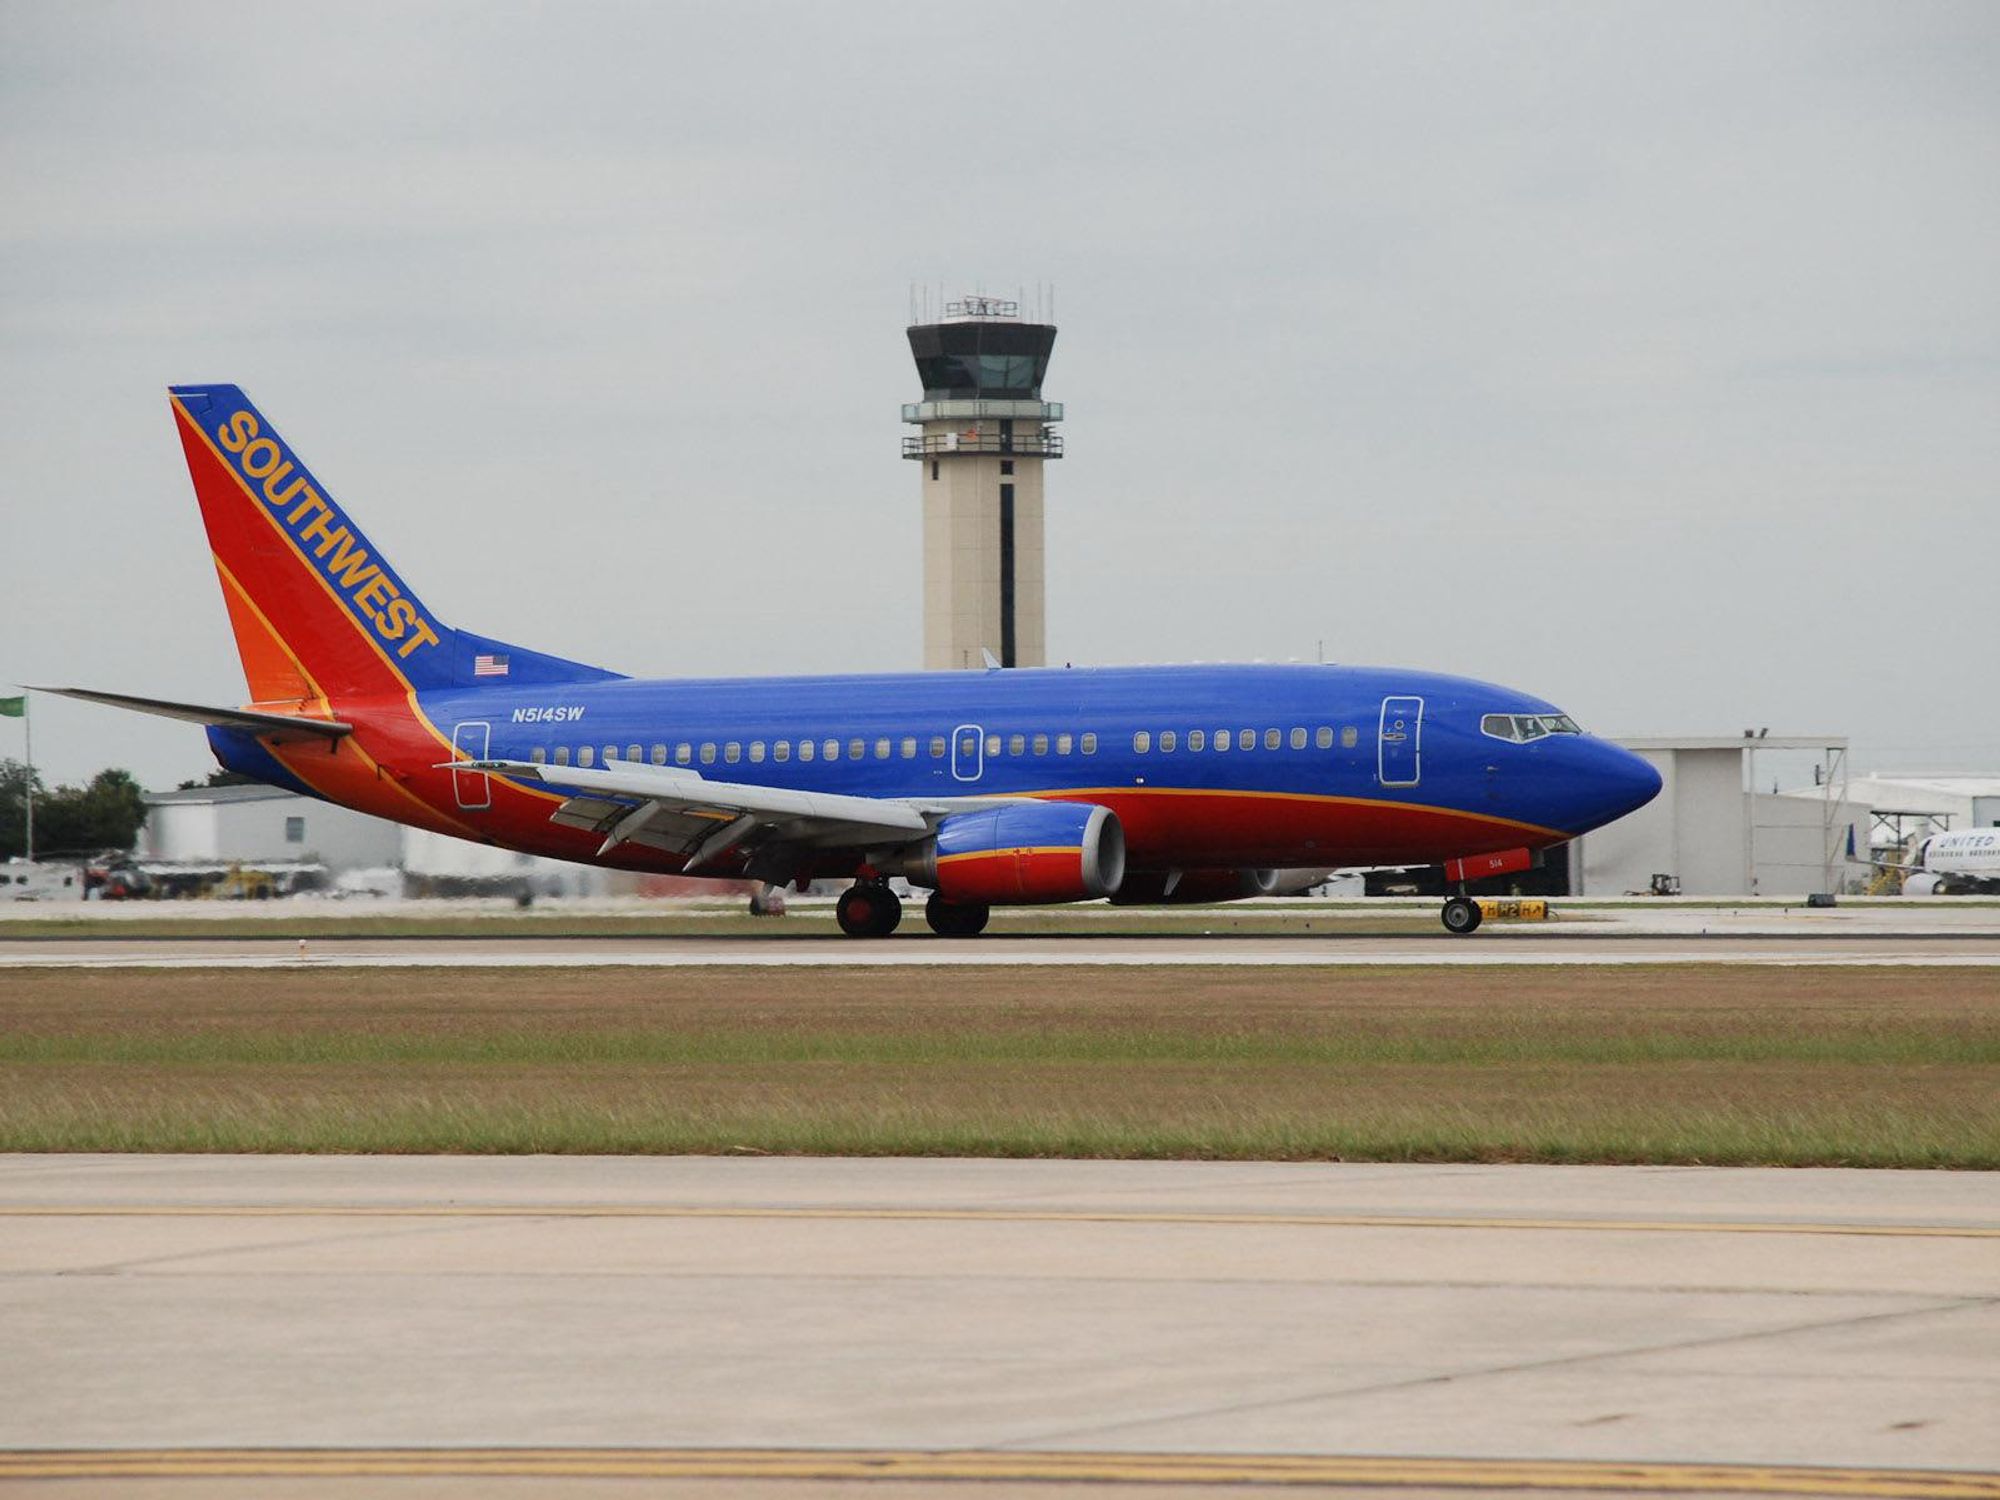 Hobby Airport Southwest Airlines plane control tower